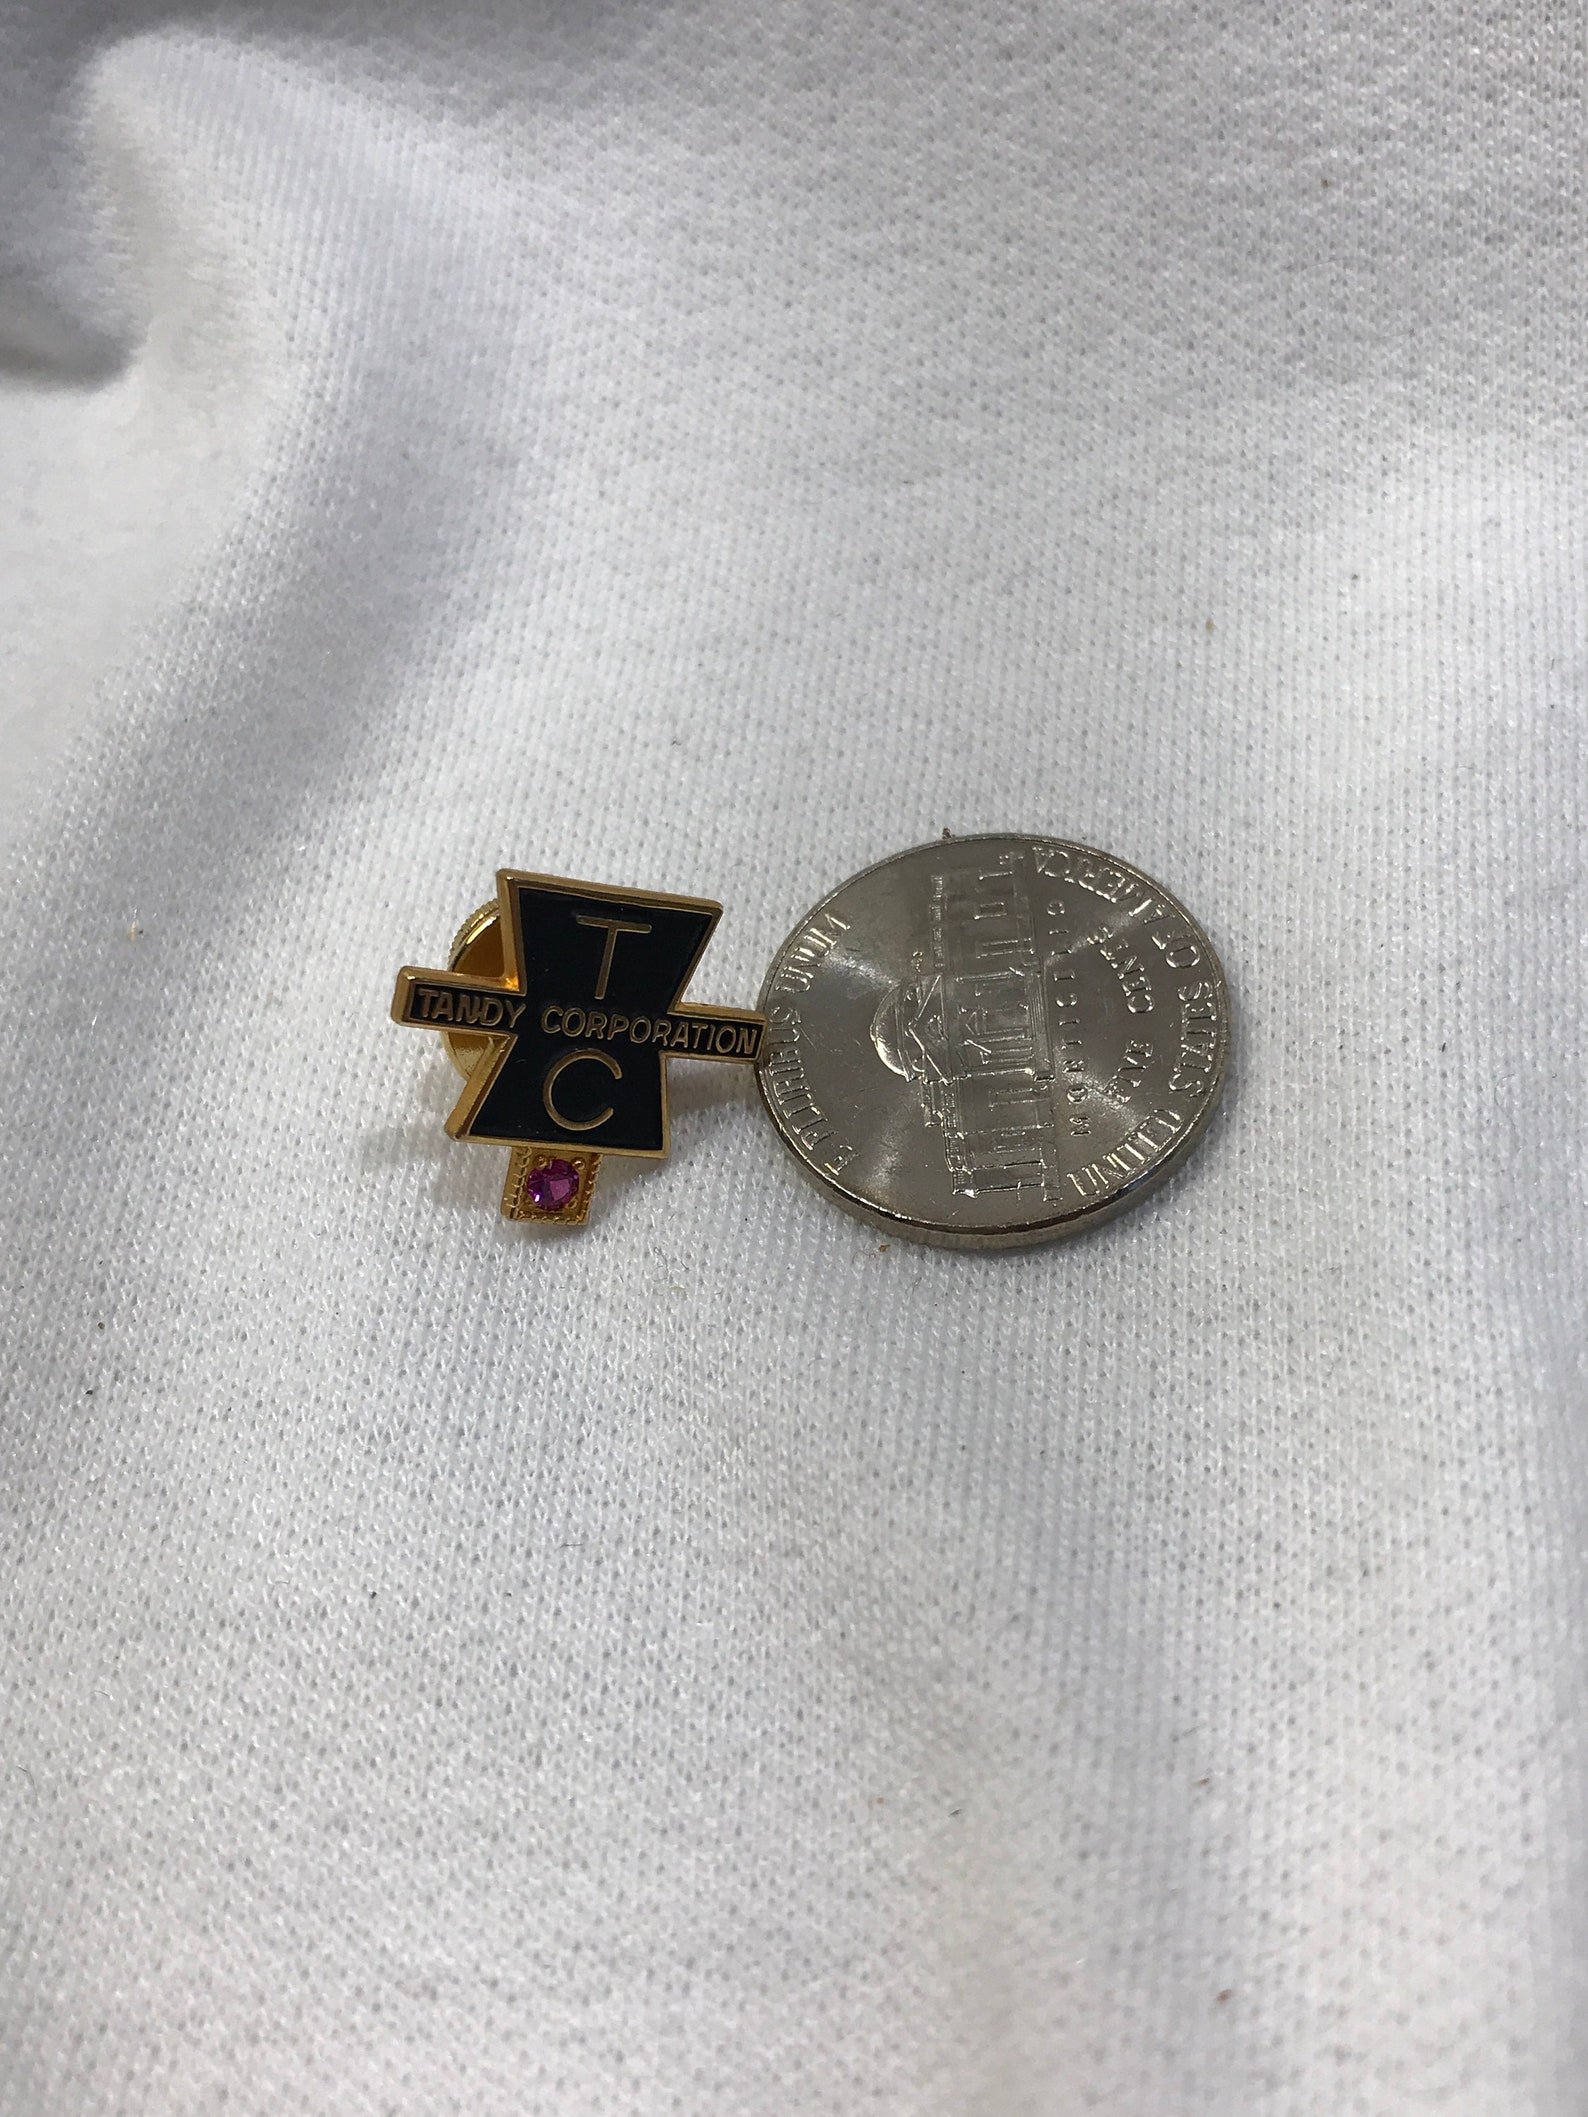 Tandy Corporation 10K gold pin with ruby gemstone service | Etsy